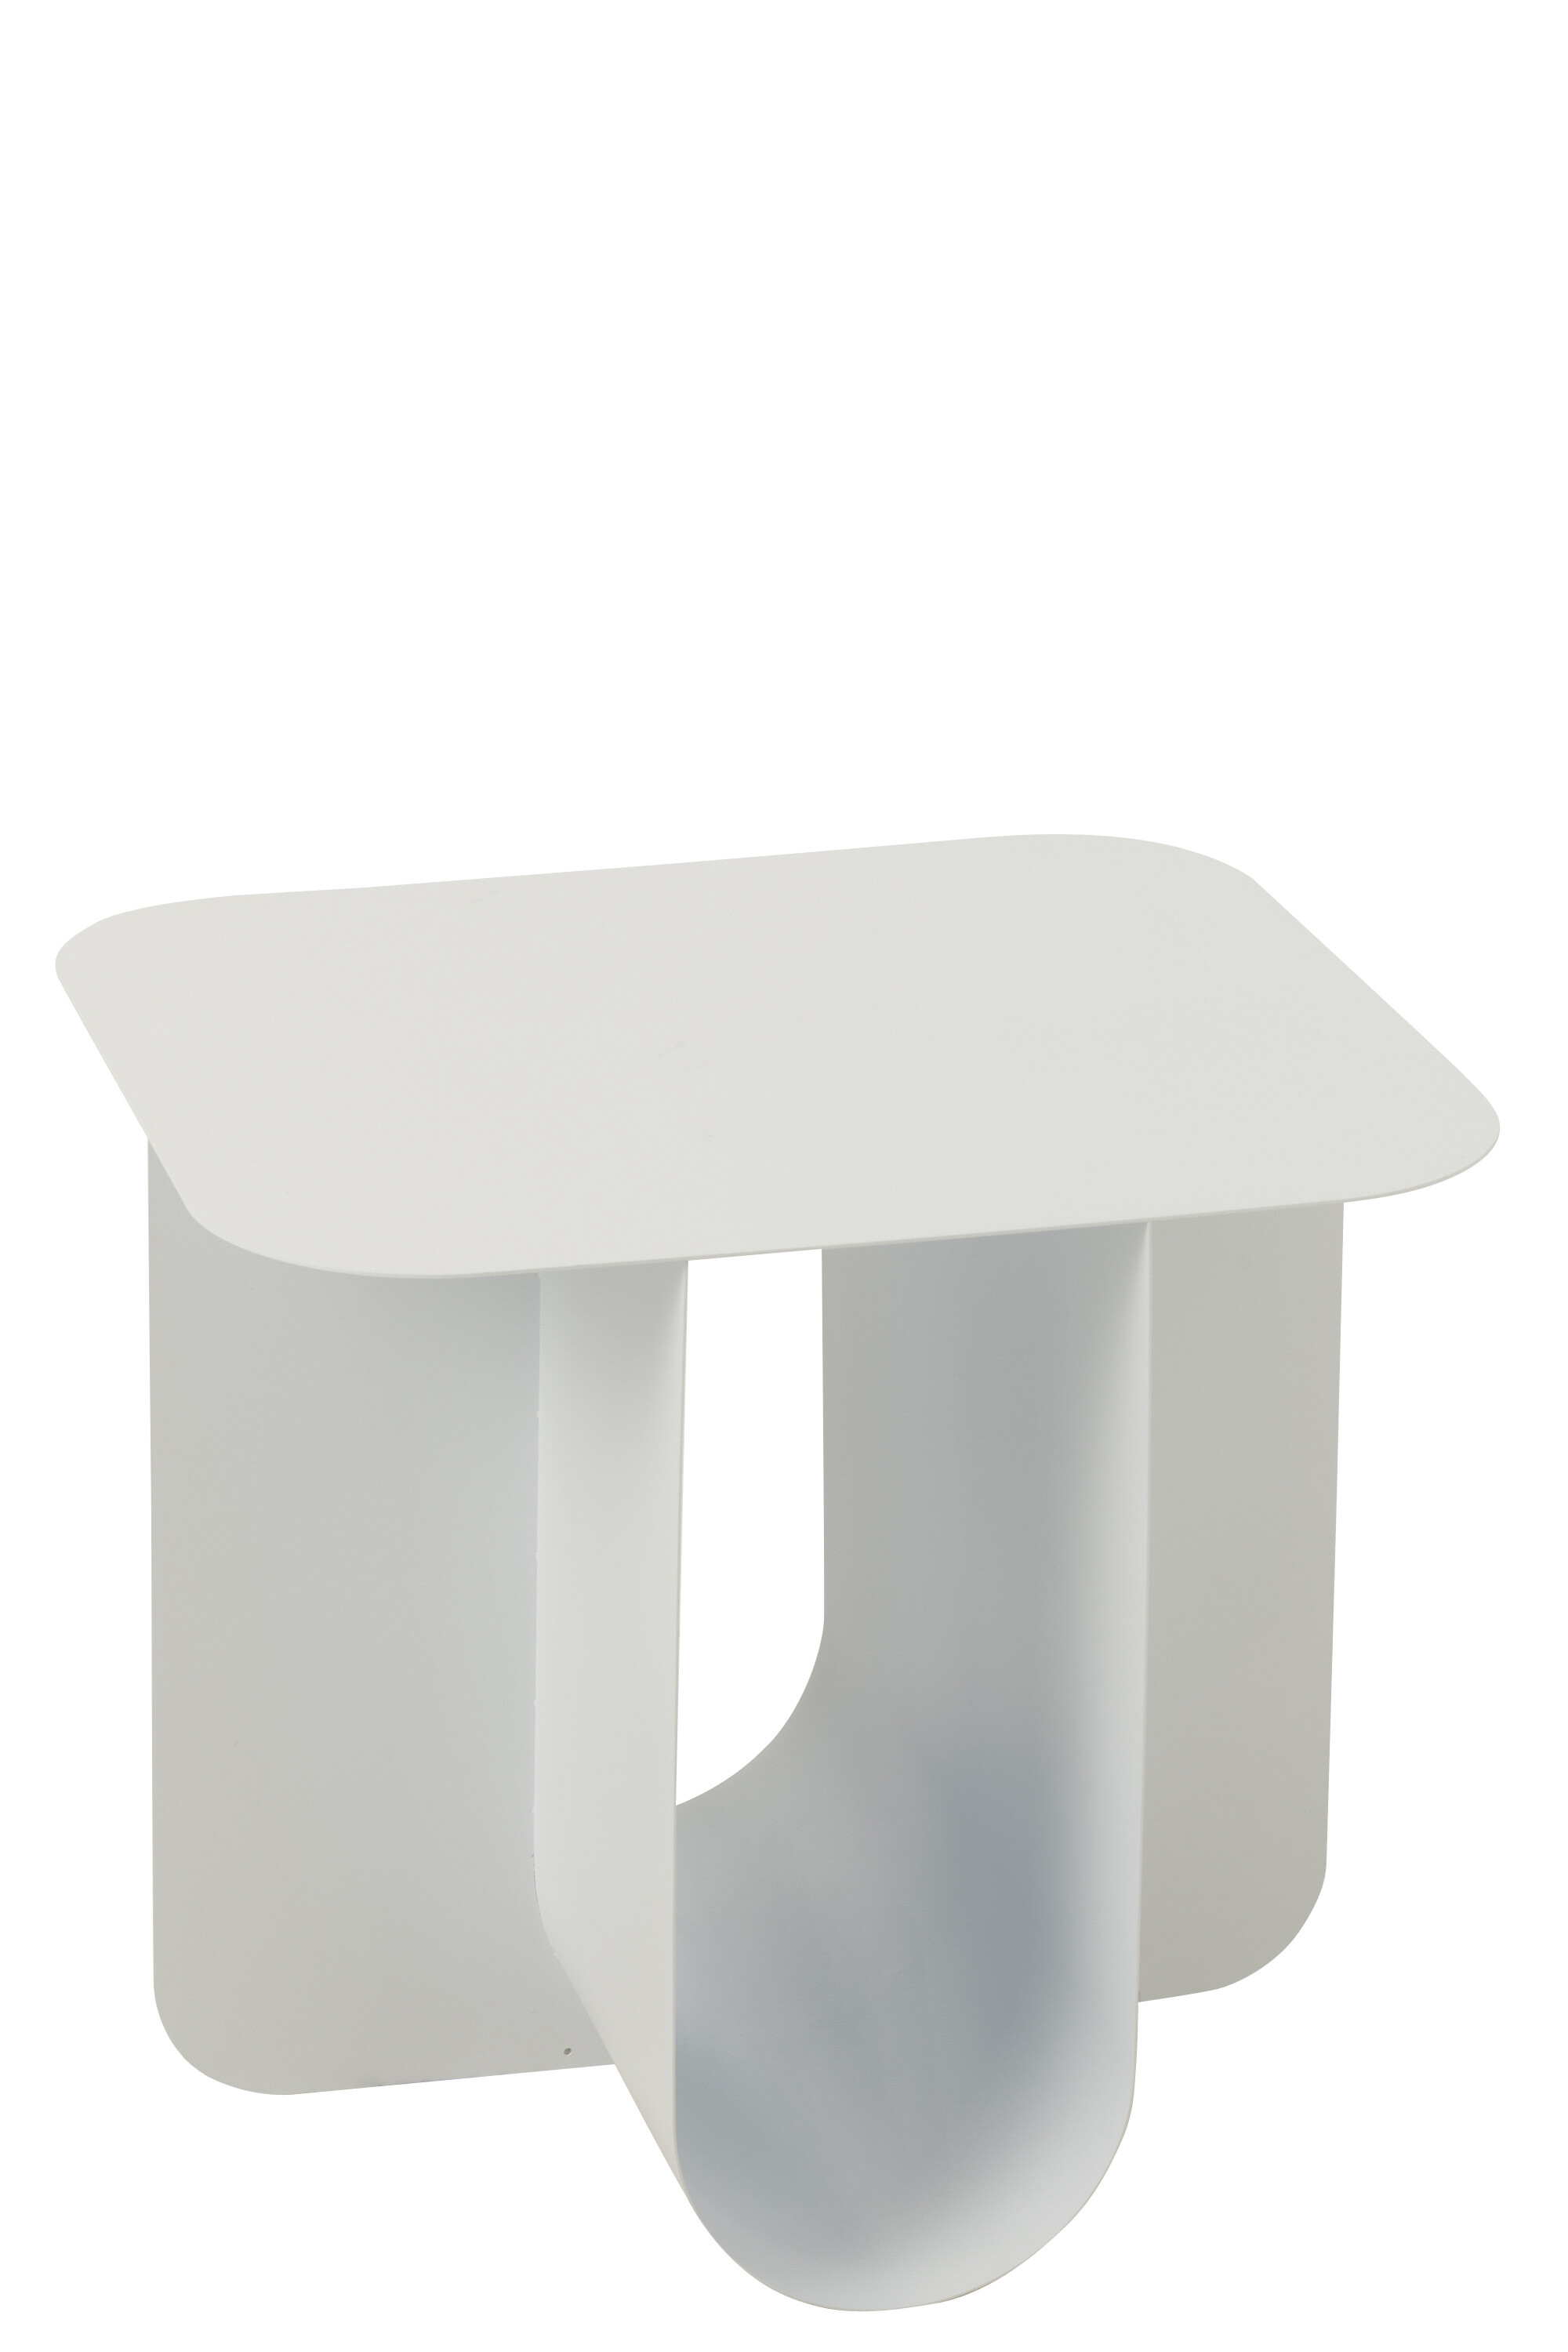 TABLE APPOINT CARREE MET BLANC